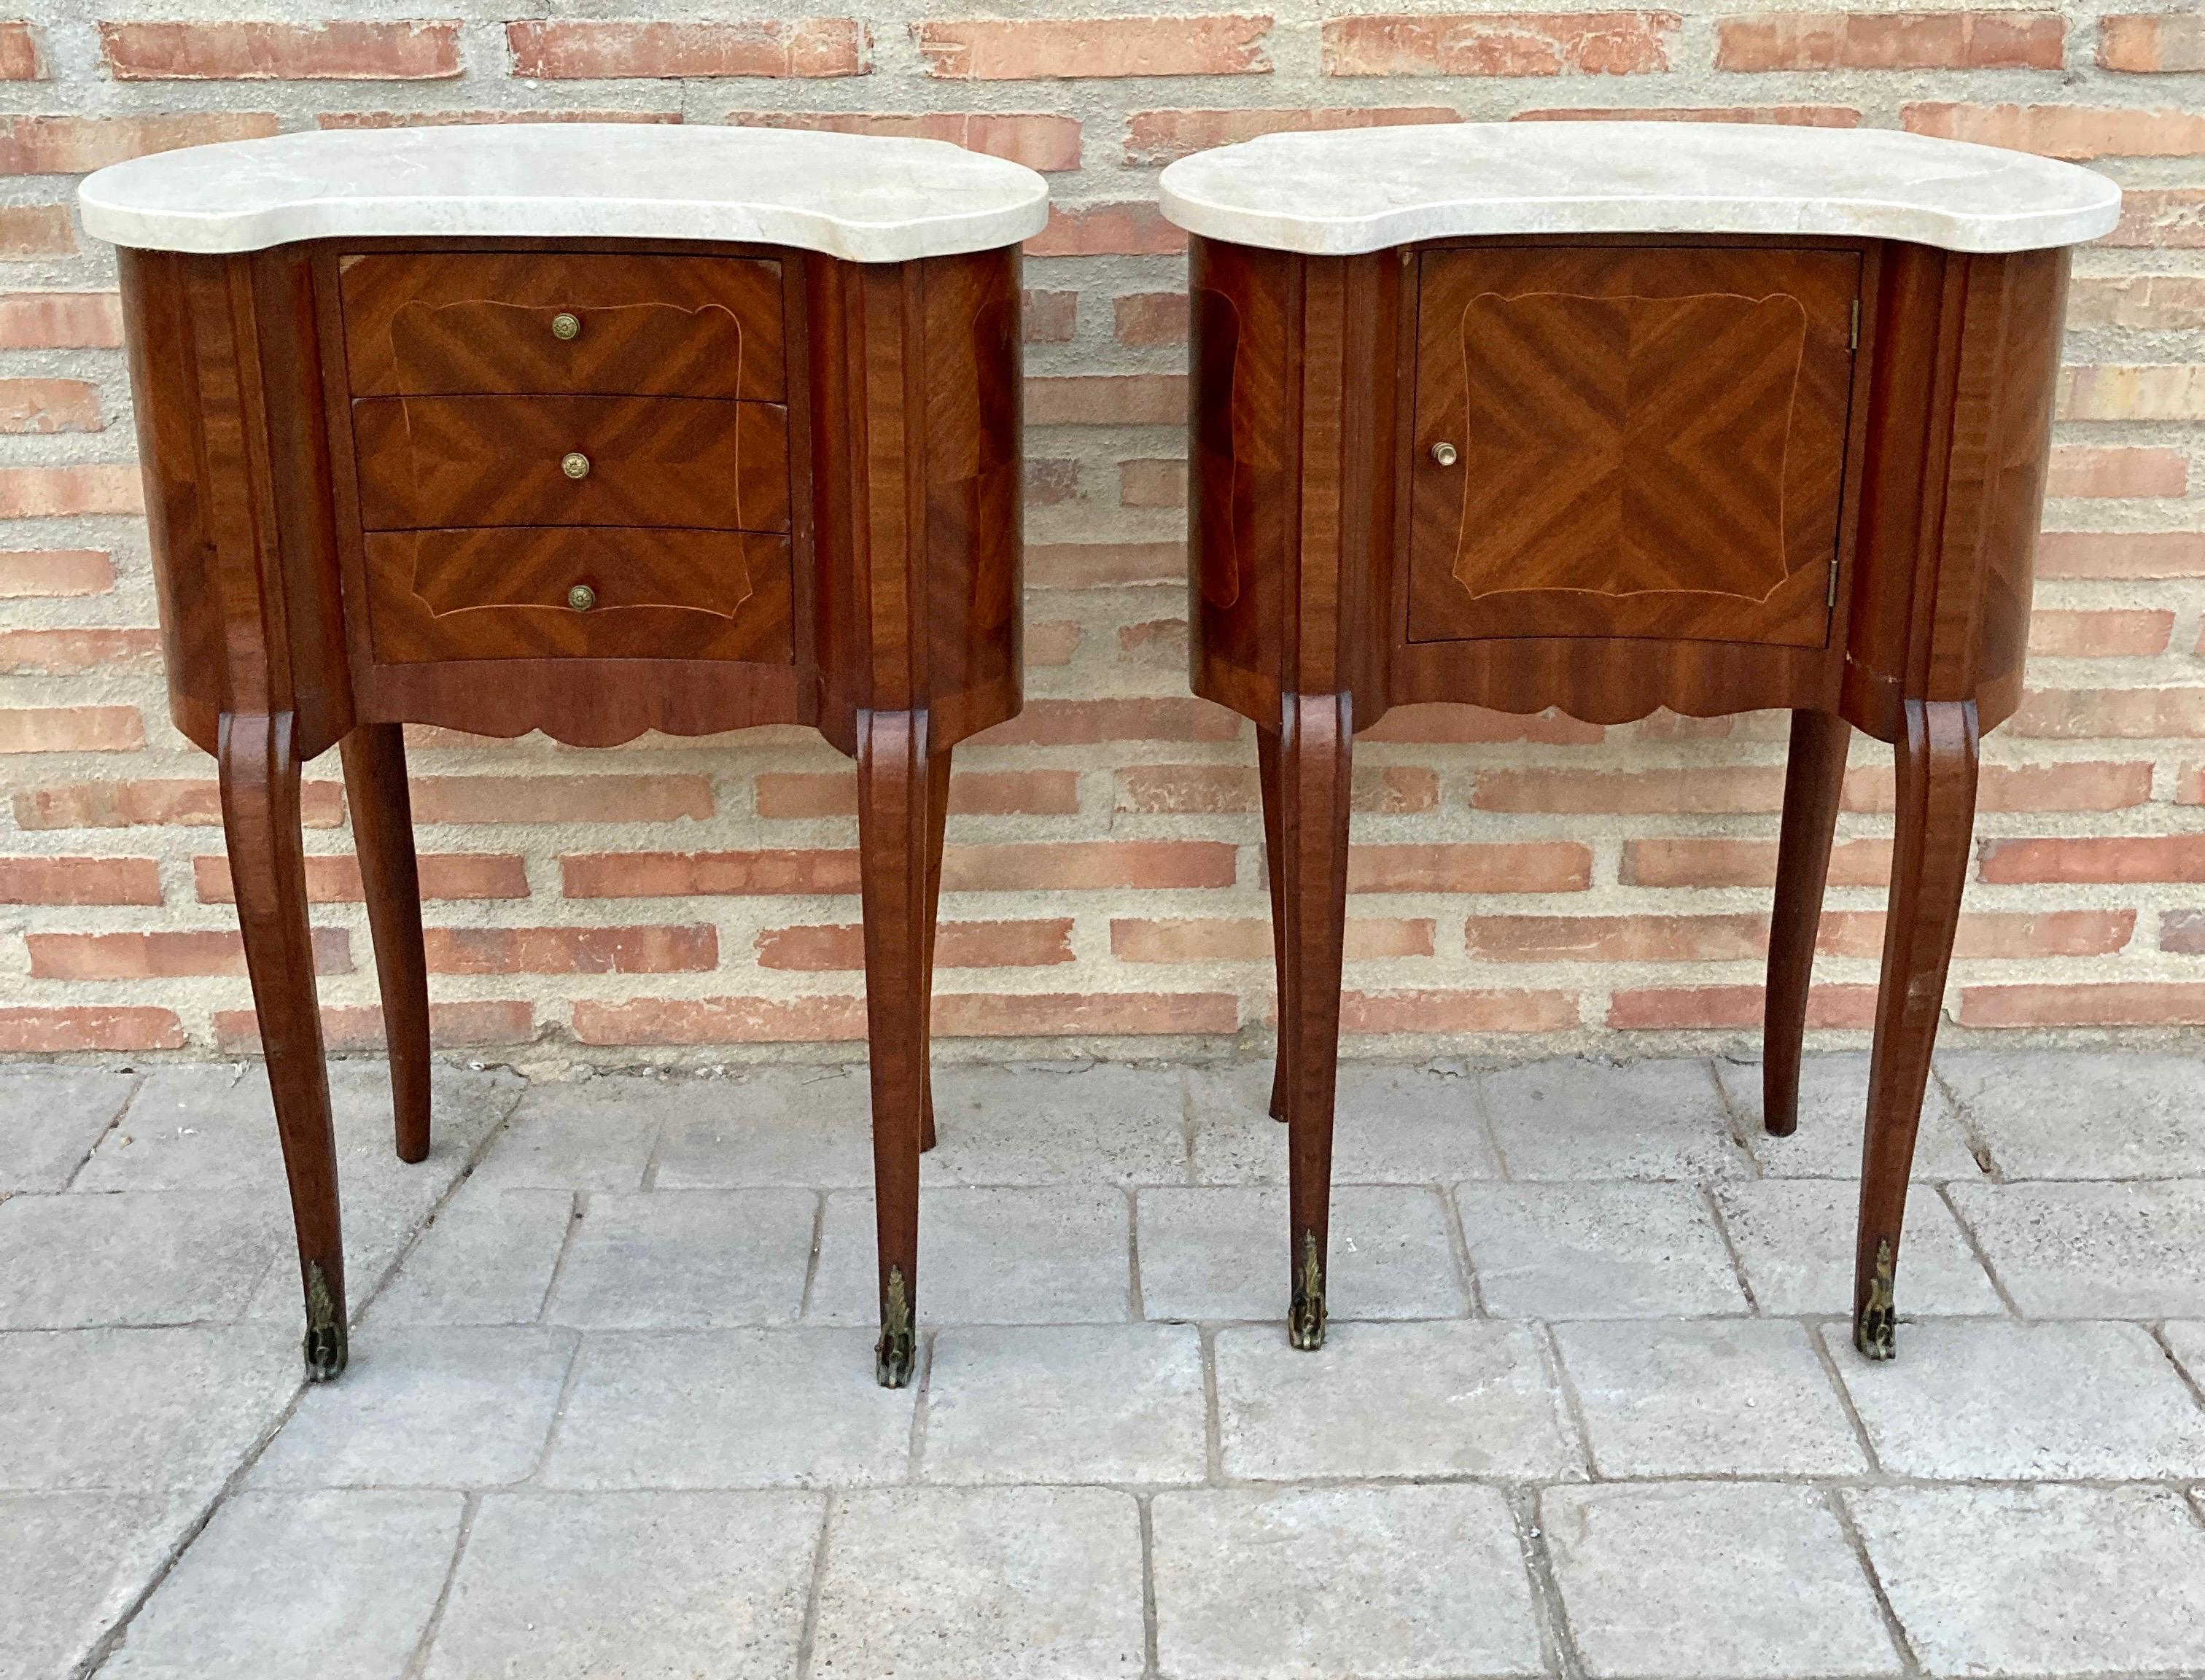 Pair of Antique French Bedside Kidney Tables with Marble Tops 1